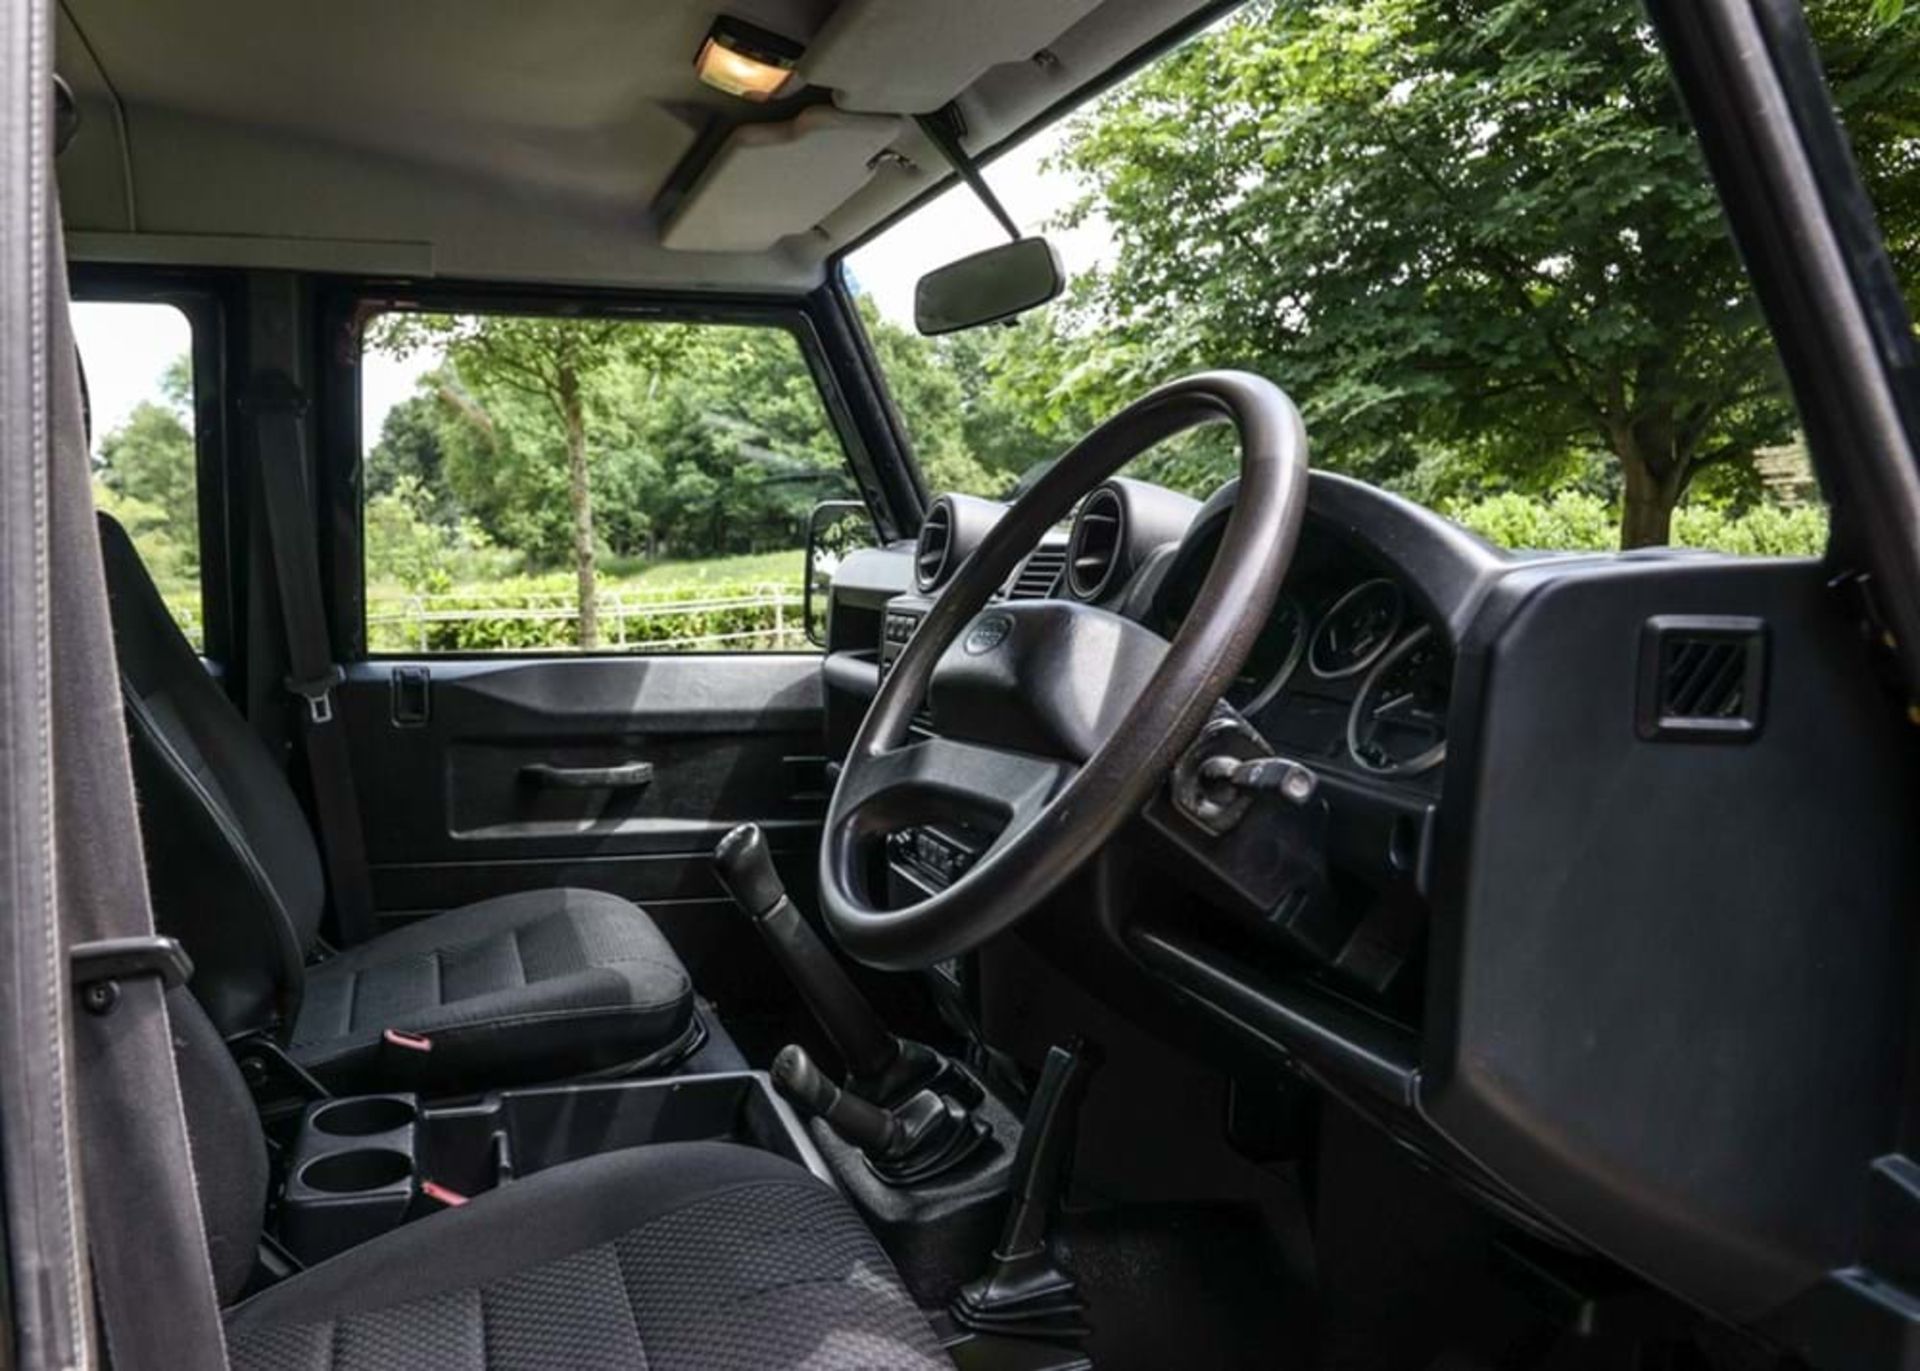 2014 Land Rover Defender 110 Double Cab Pick-Up - Image 5 of 9